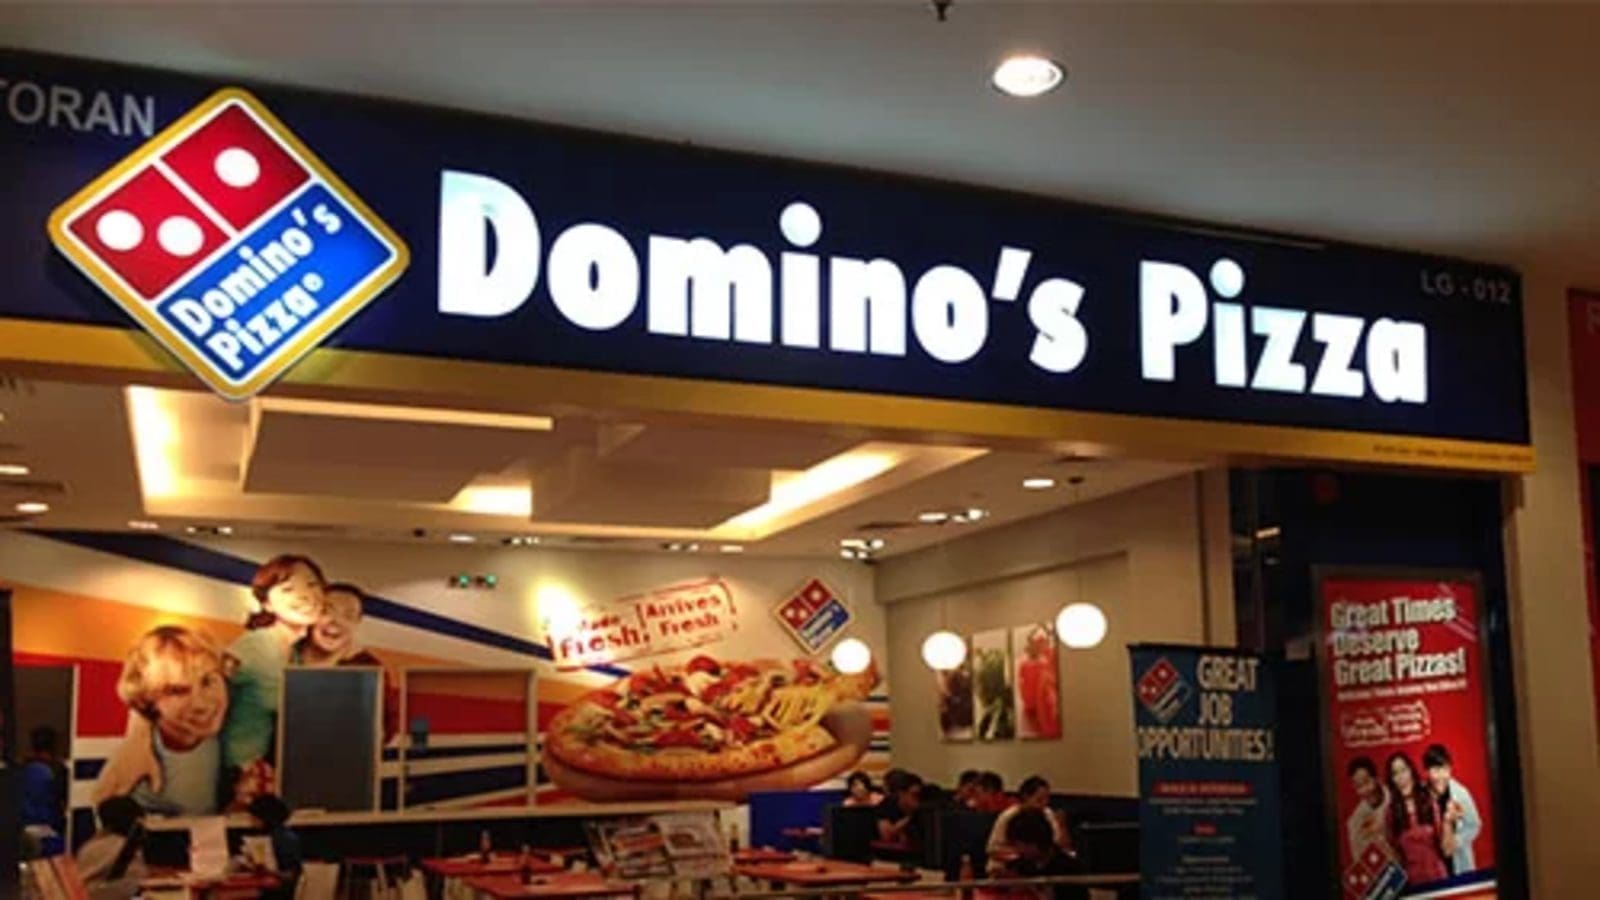 India’s Jubilant Foodworks to enter European fast food franchise business through acquisition of Dutch firm